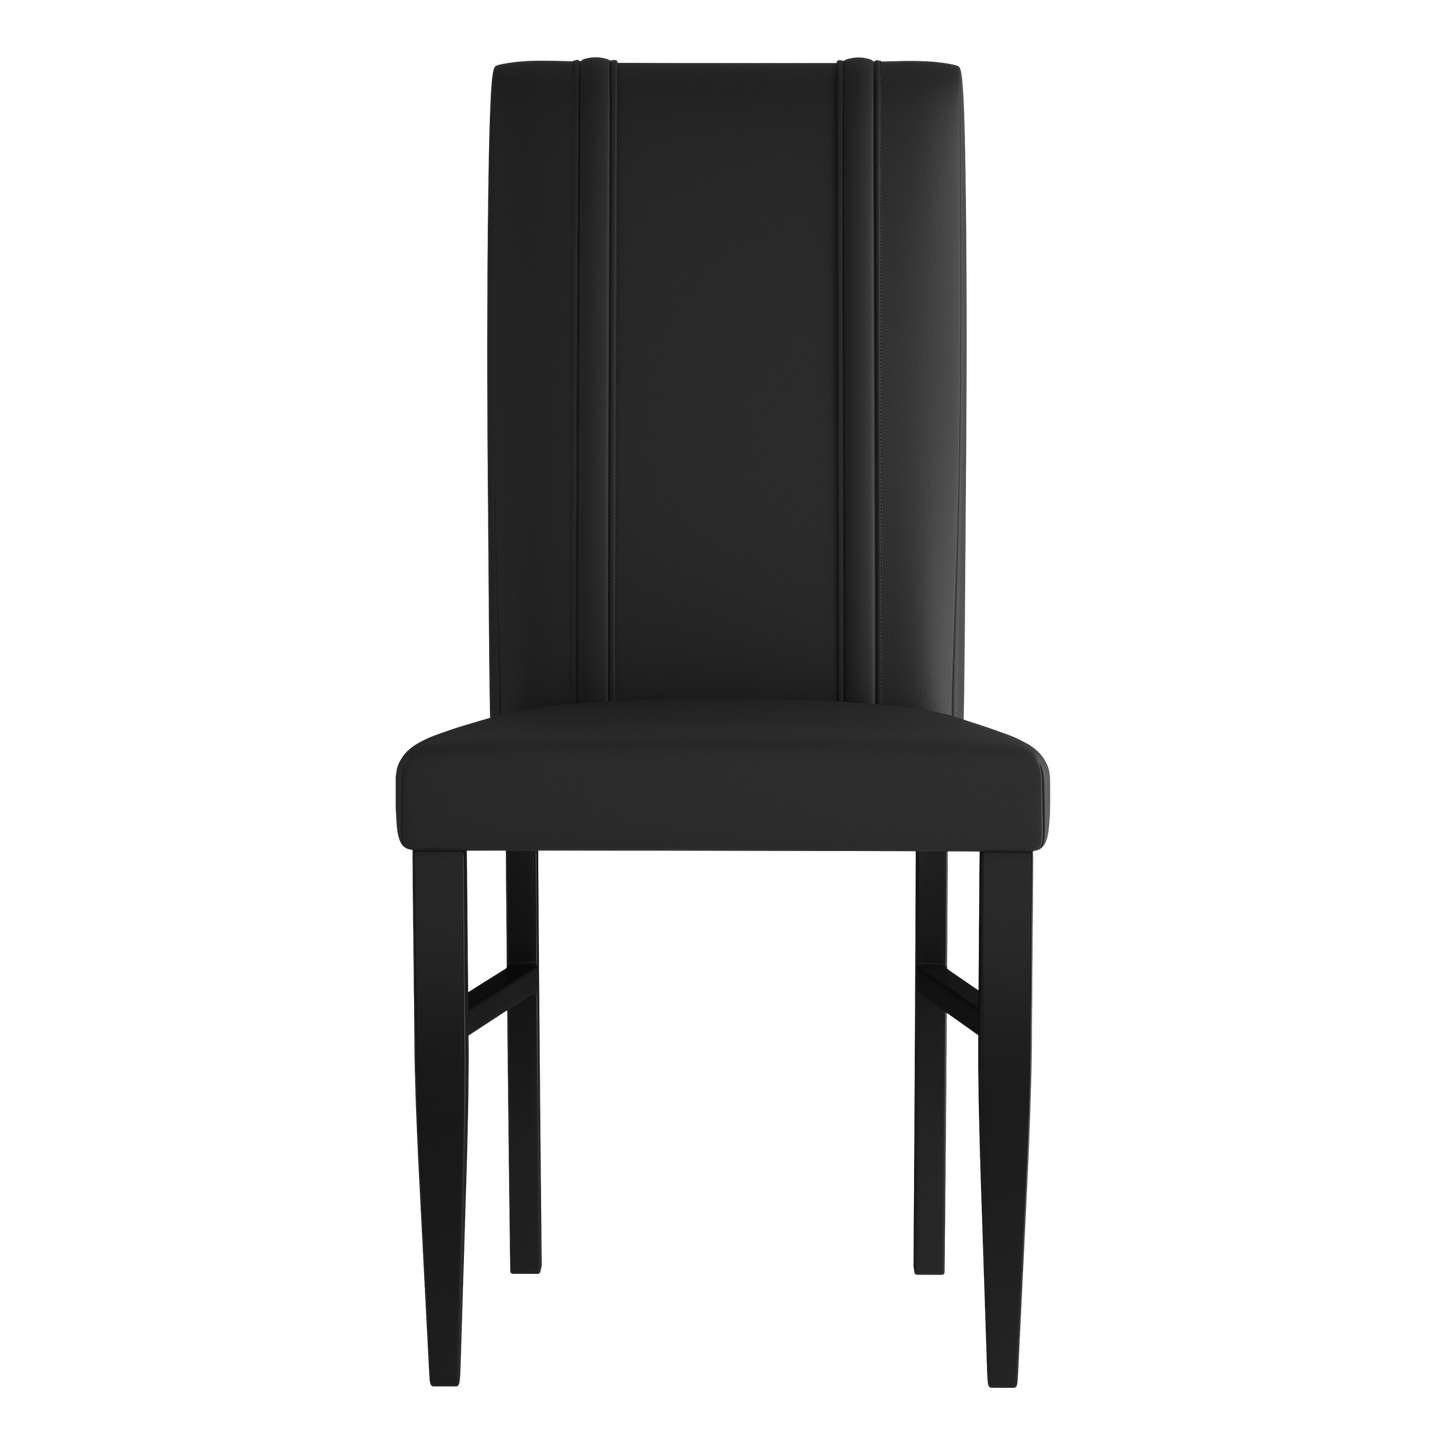 Side Chair 2000 with Minnesota United FC Logo Set of 2